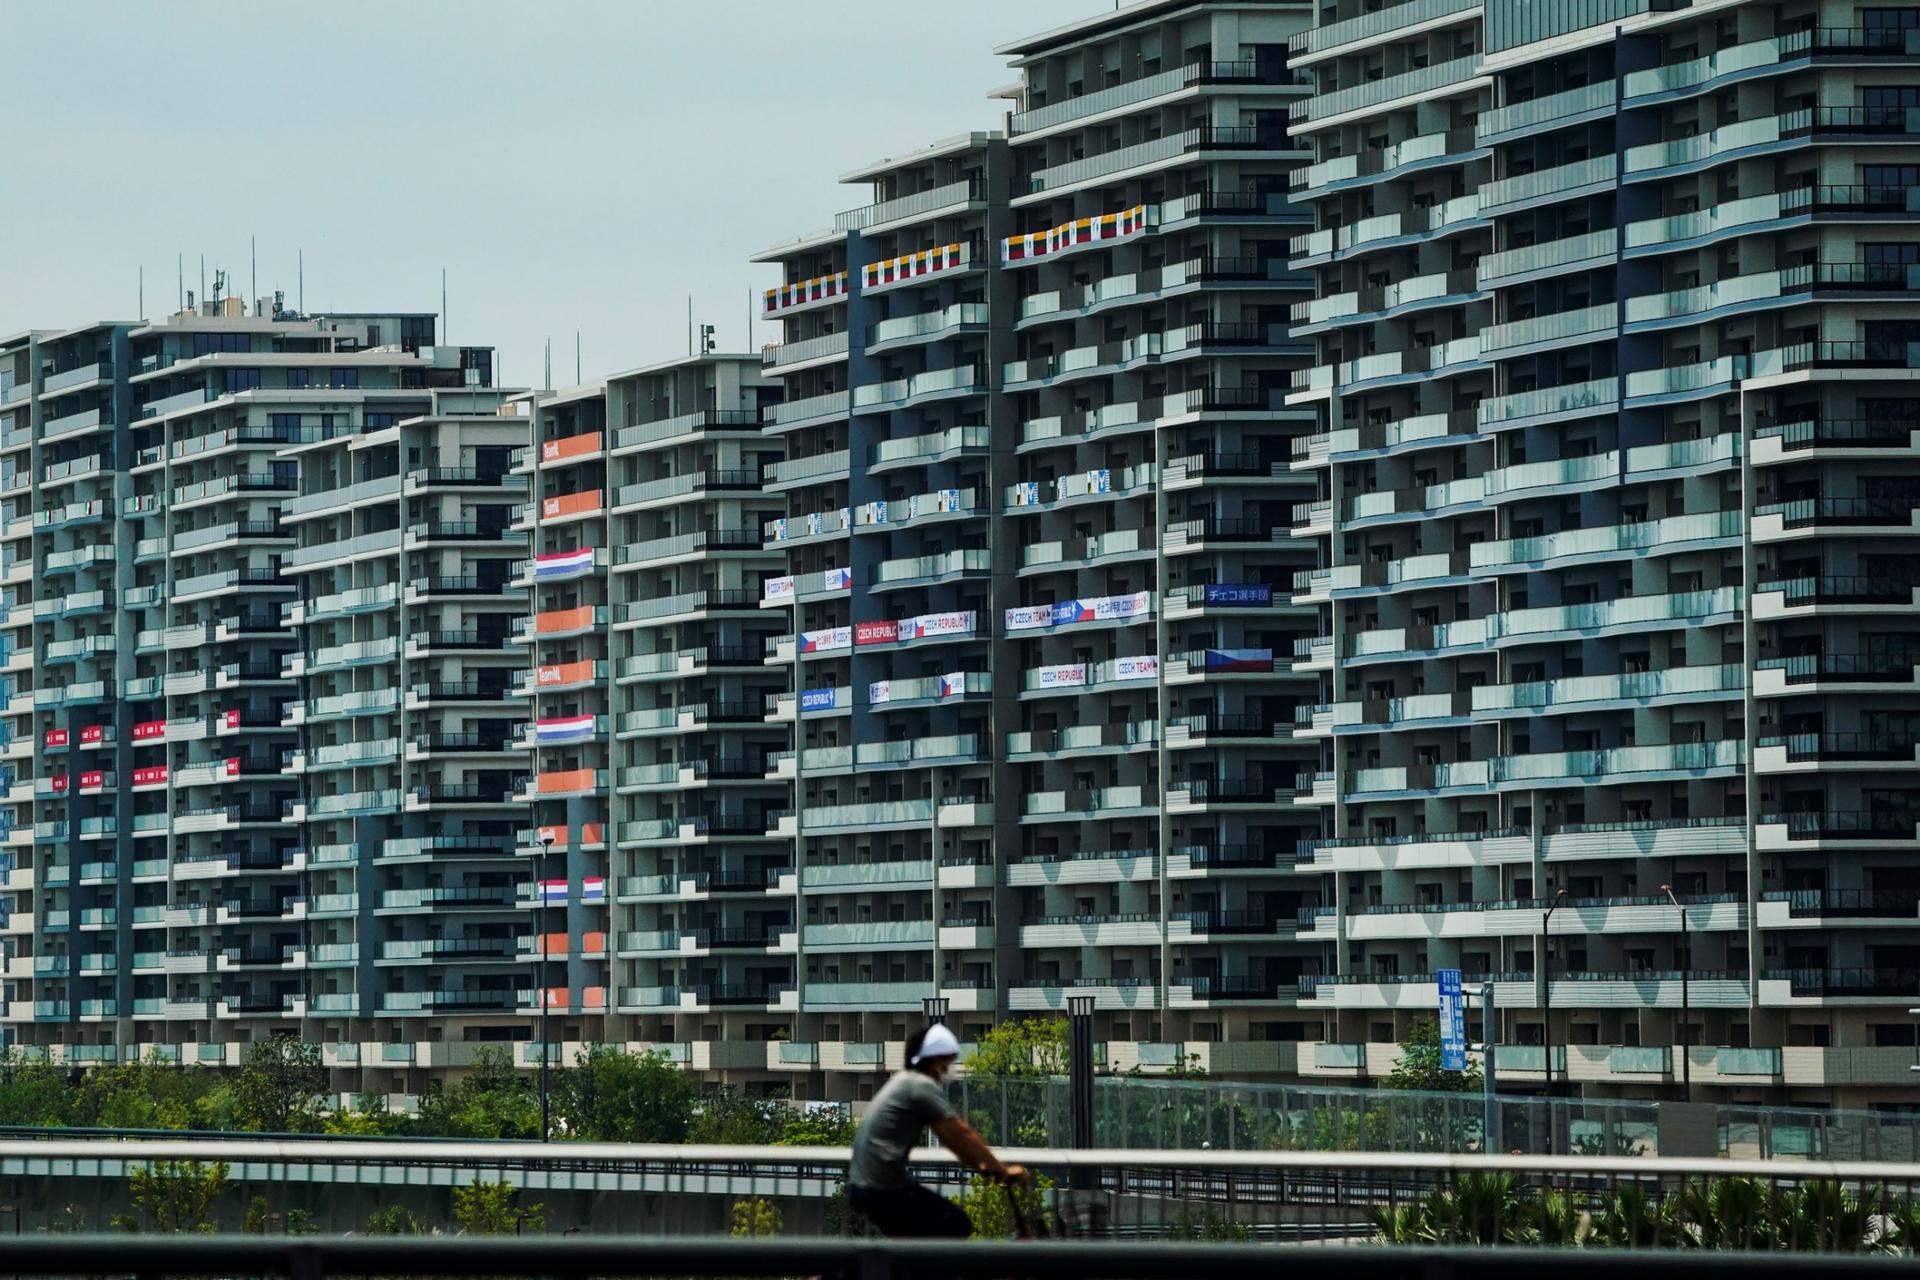 A row of tall buildings are shown, many with national flags hanging from the balconies.